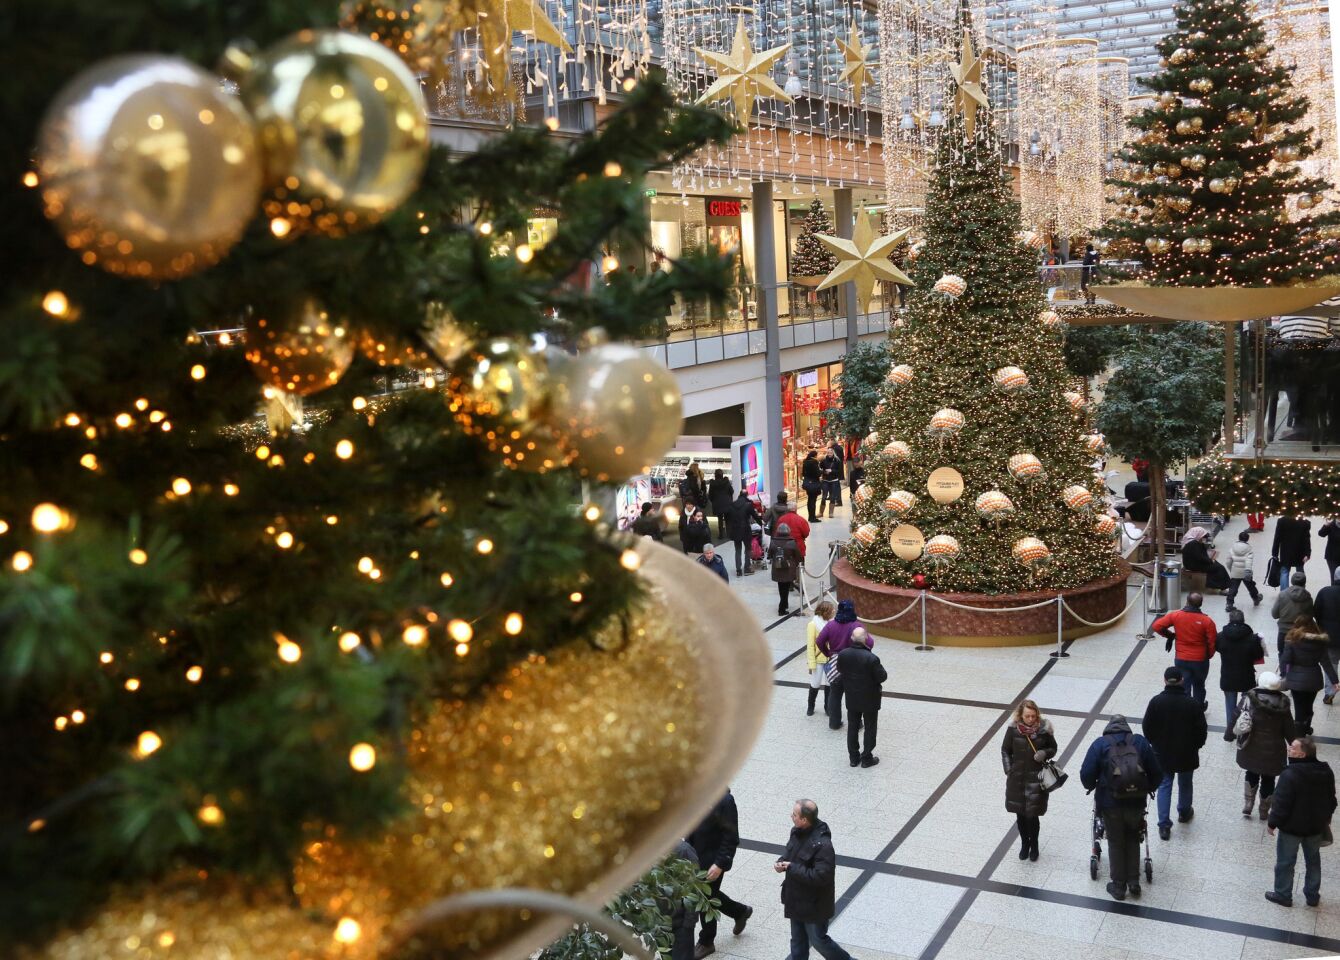 There are Christmas trees at every turn at this popular shopping mall.